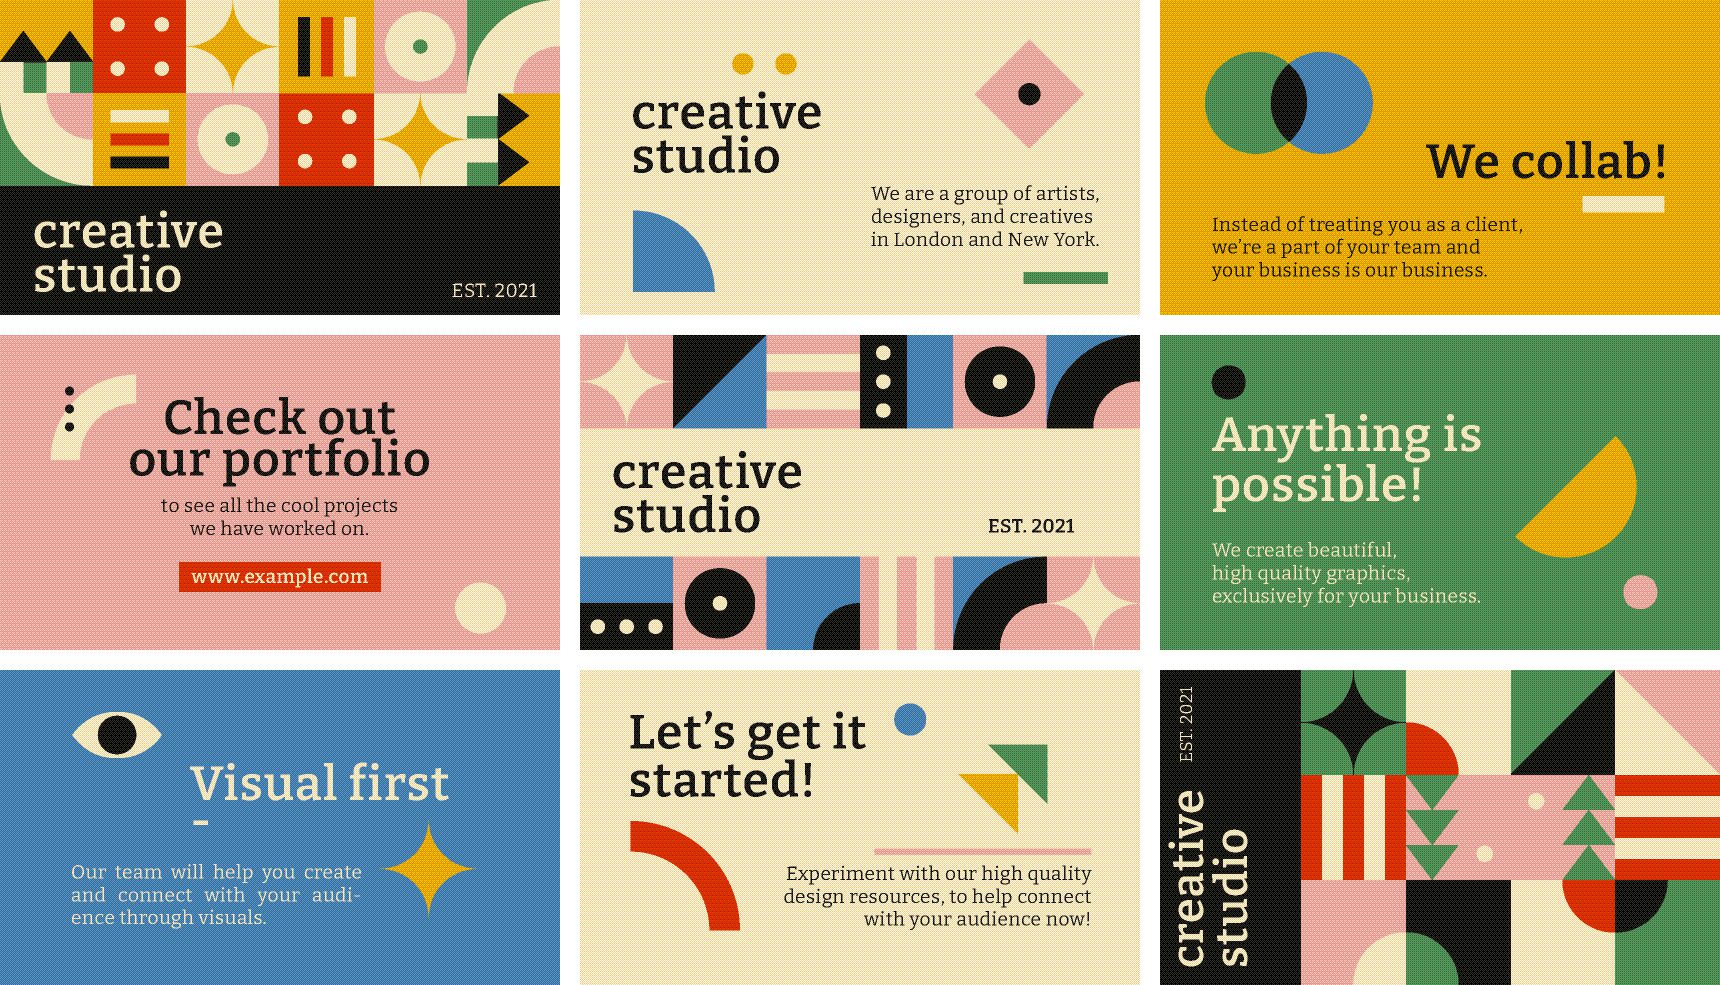 How to elevate your business with good graphics